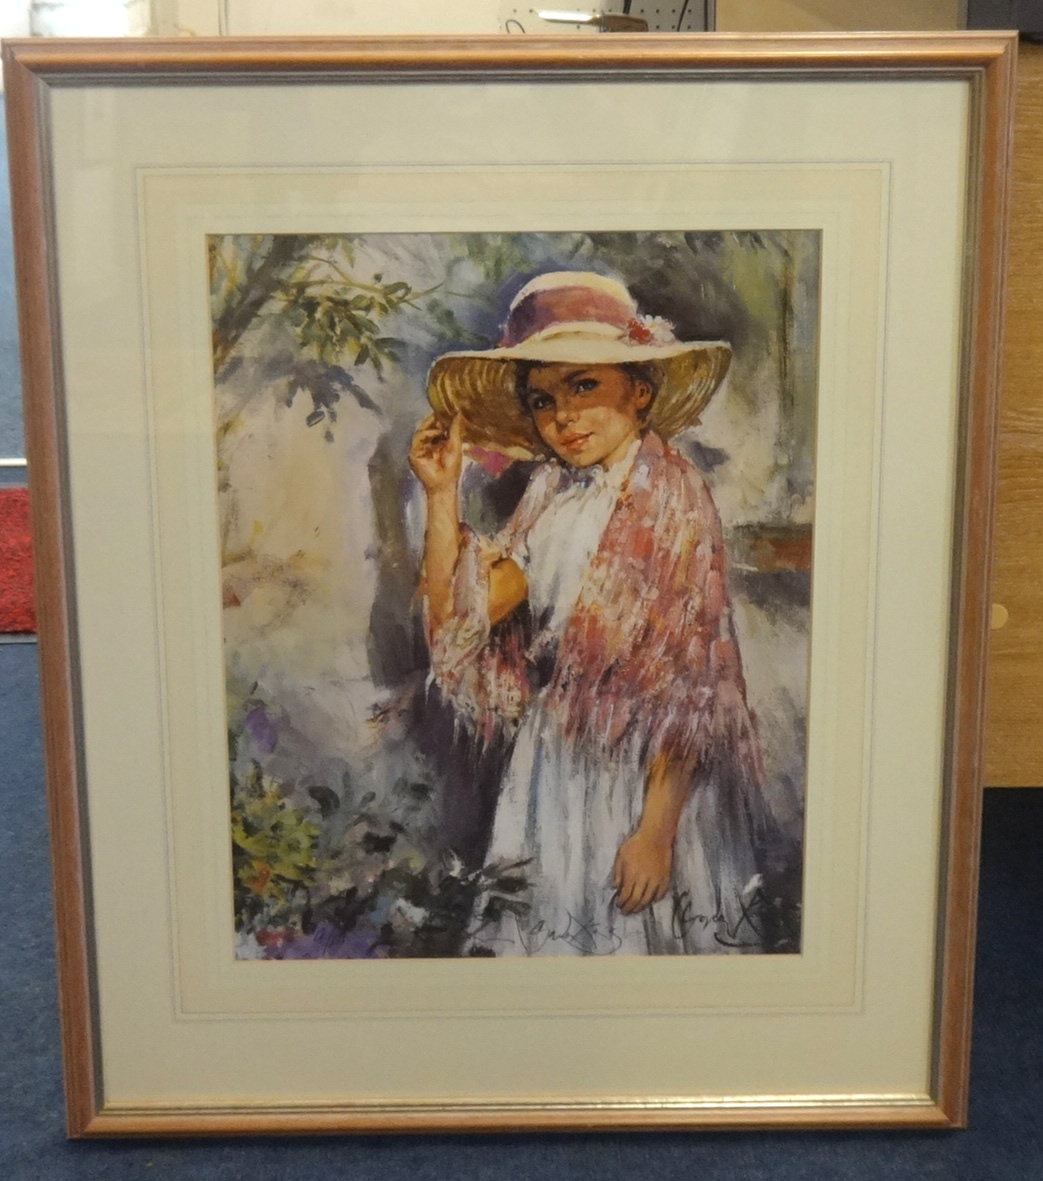 Gordon King, signed limited edition Artist Proof, 'Girl with Straw Hat' print, 45cm x 35cm. - Image 2 of 2